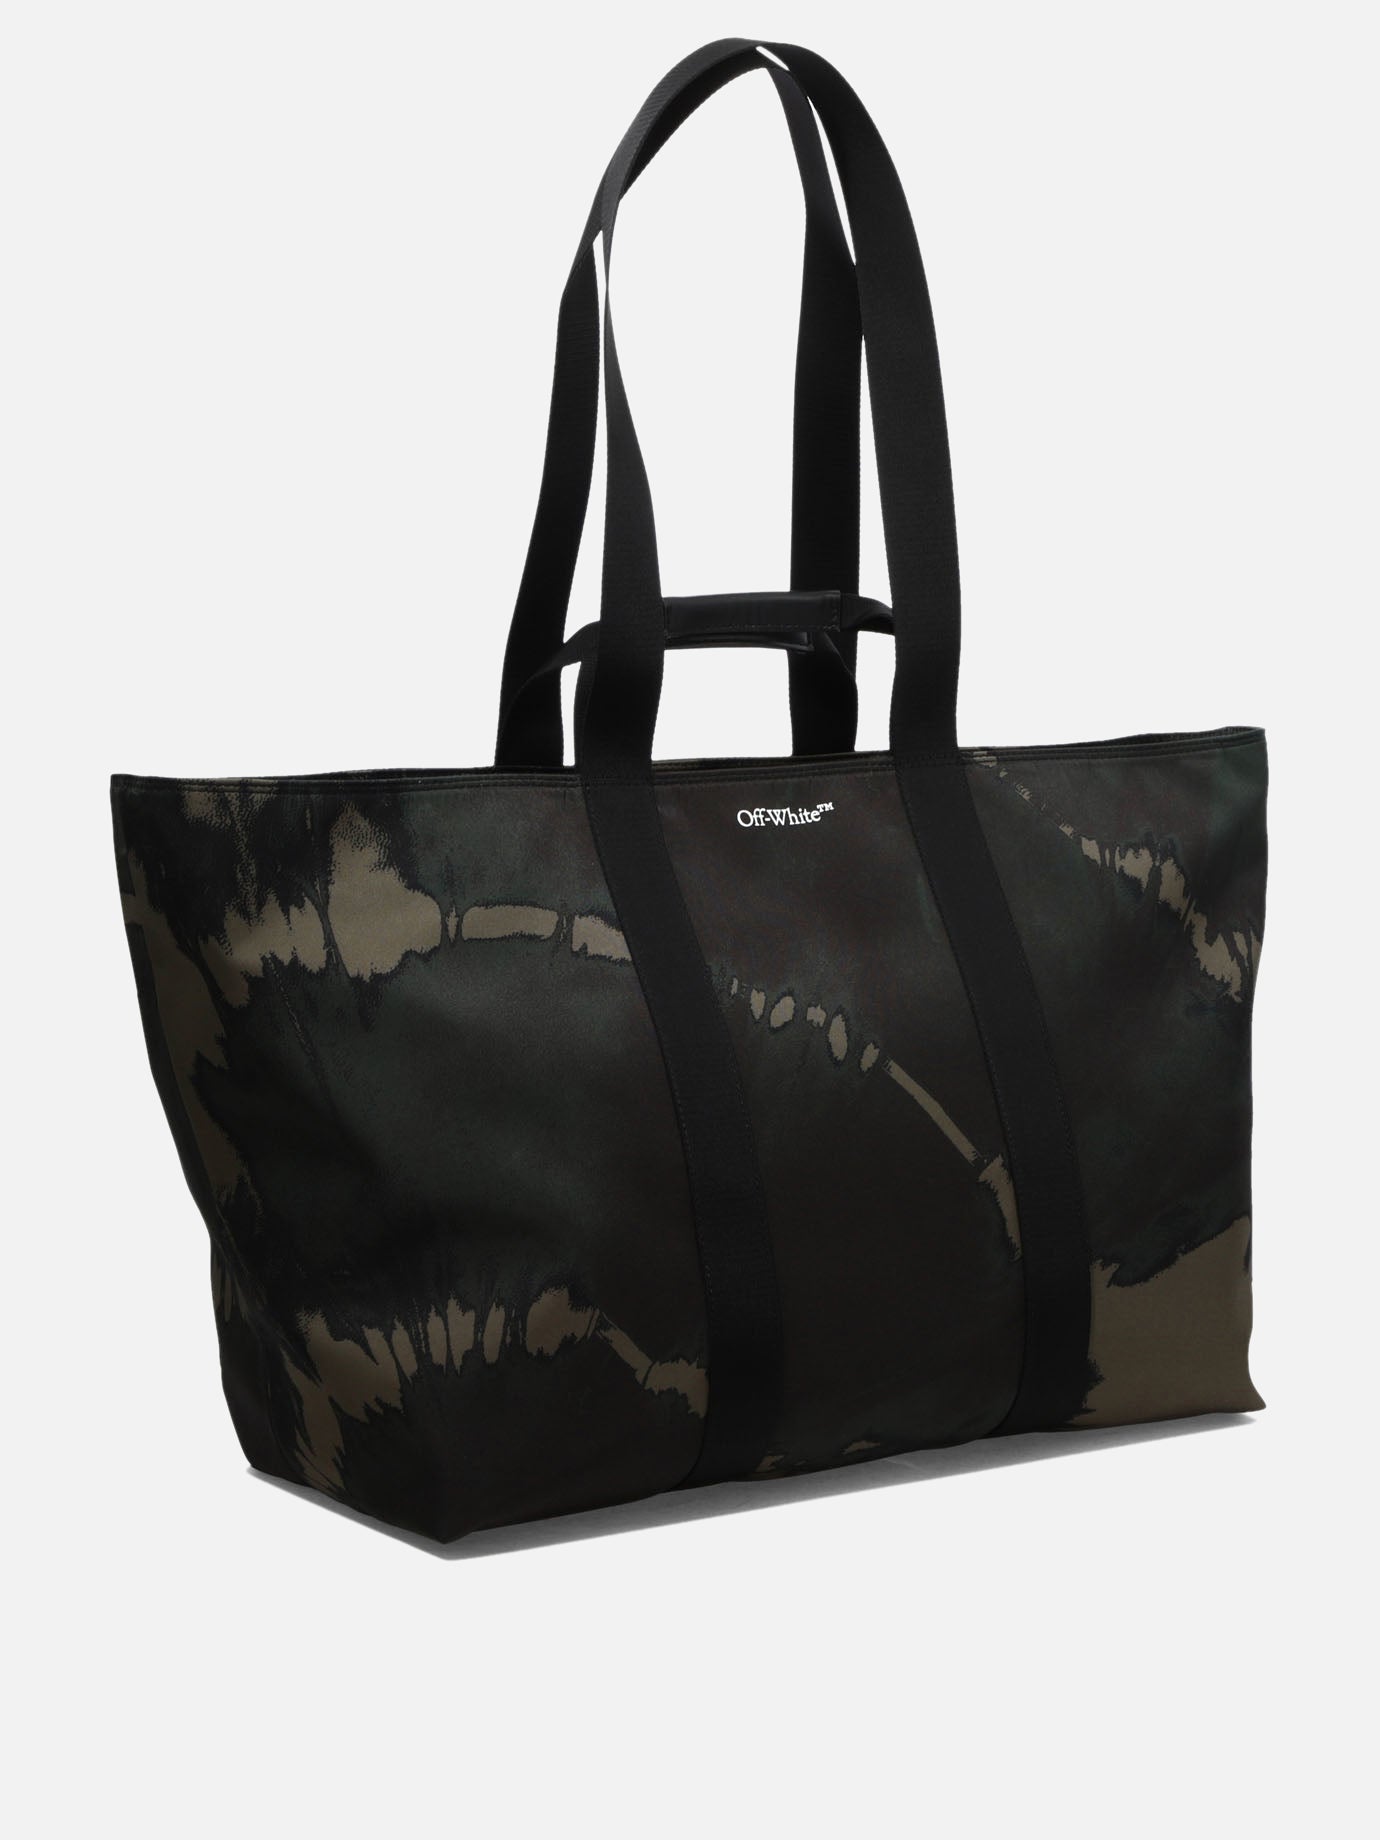 "Commercial" tote bag